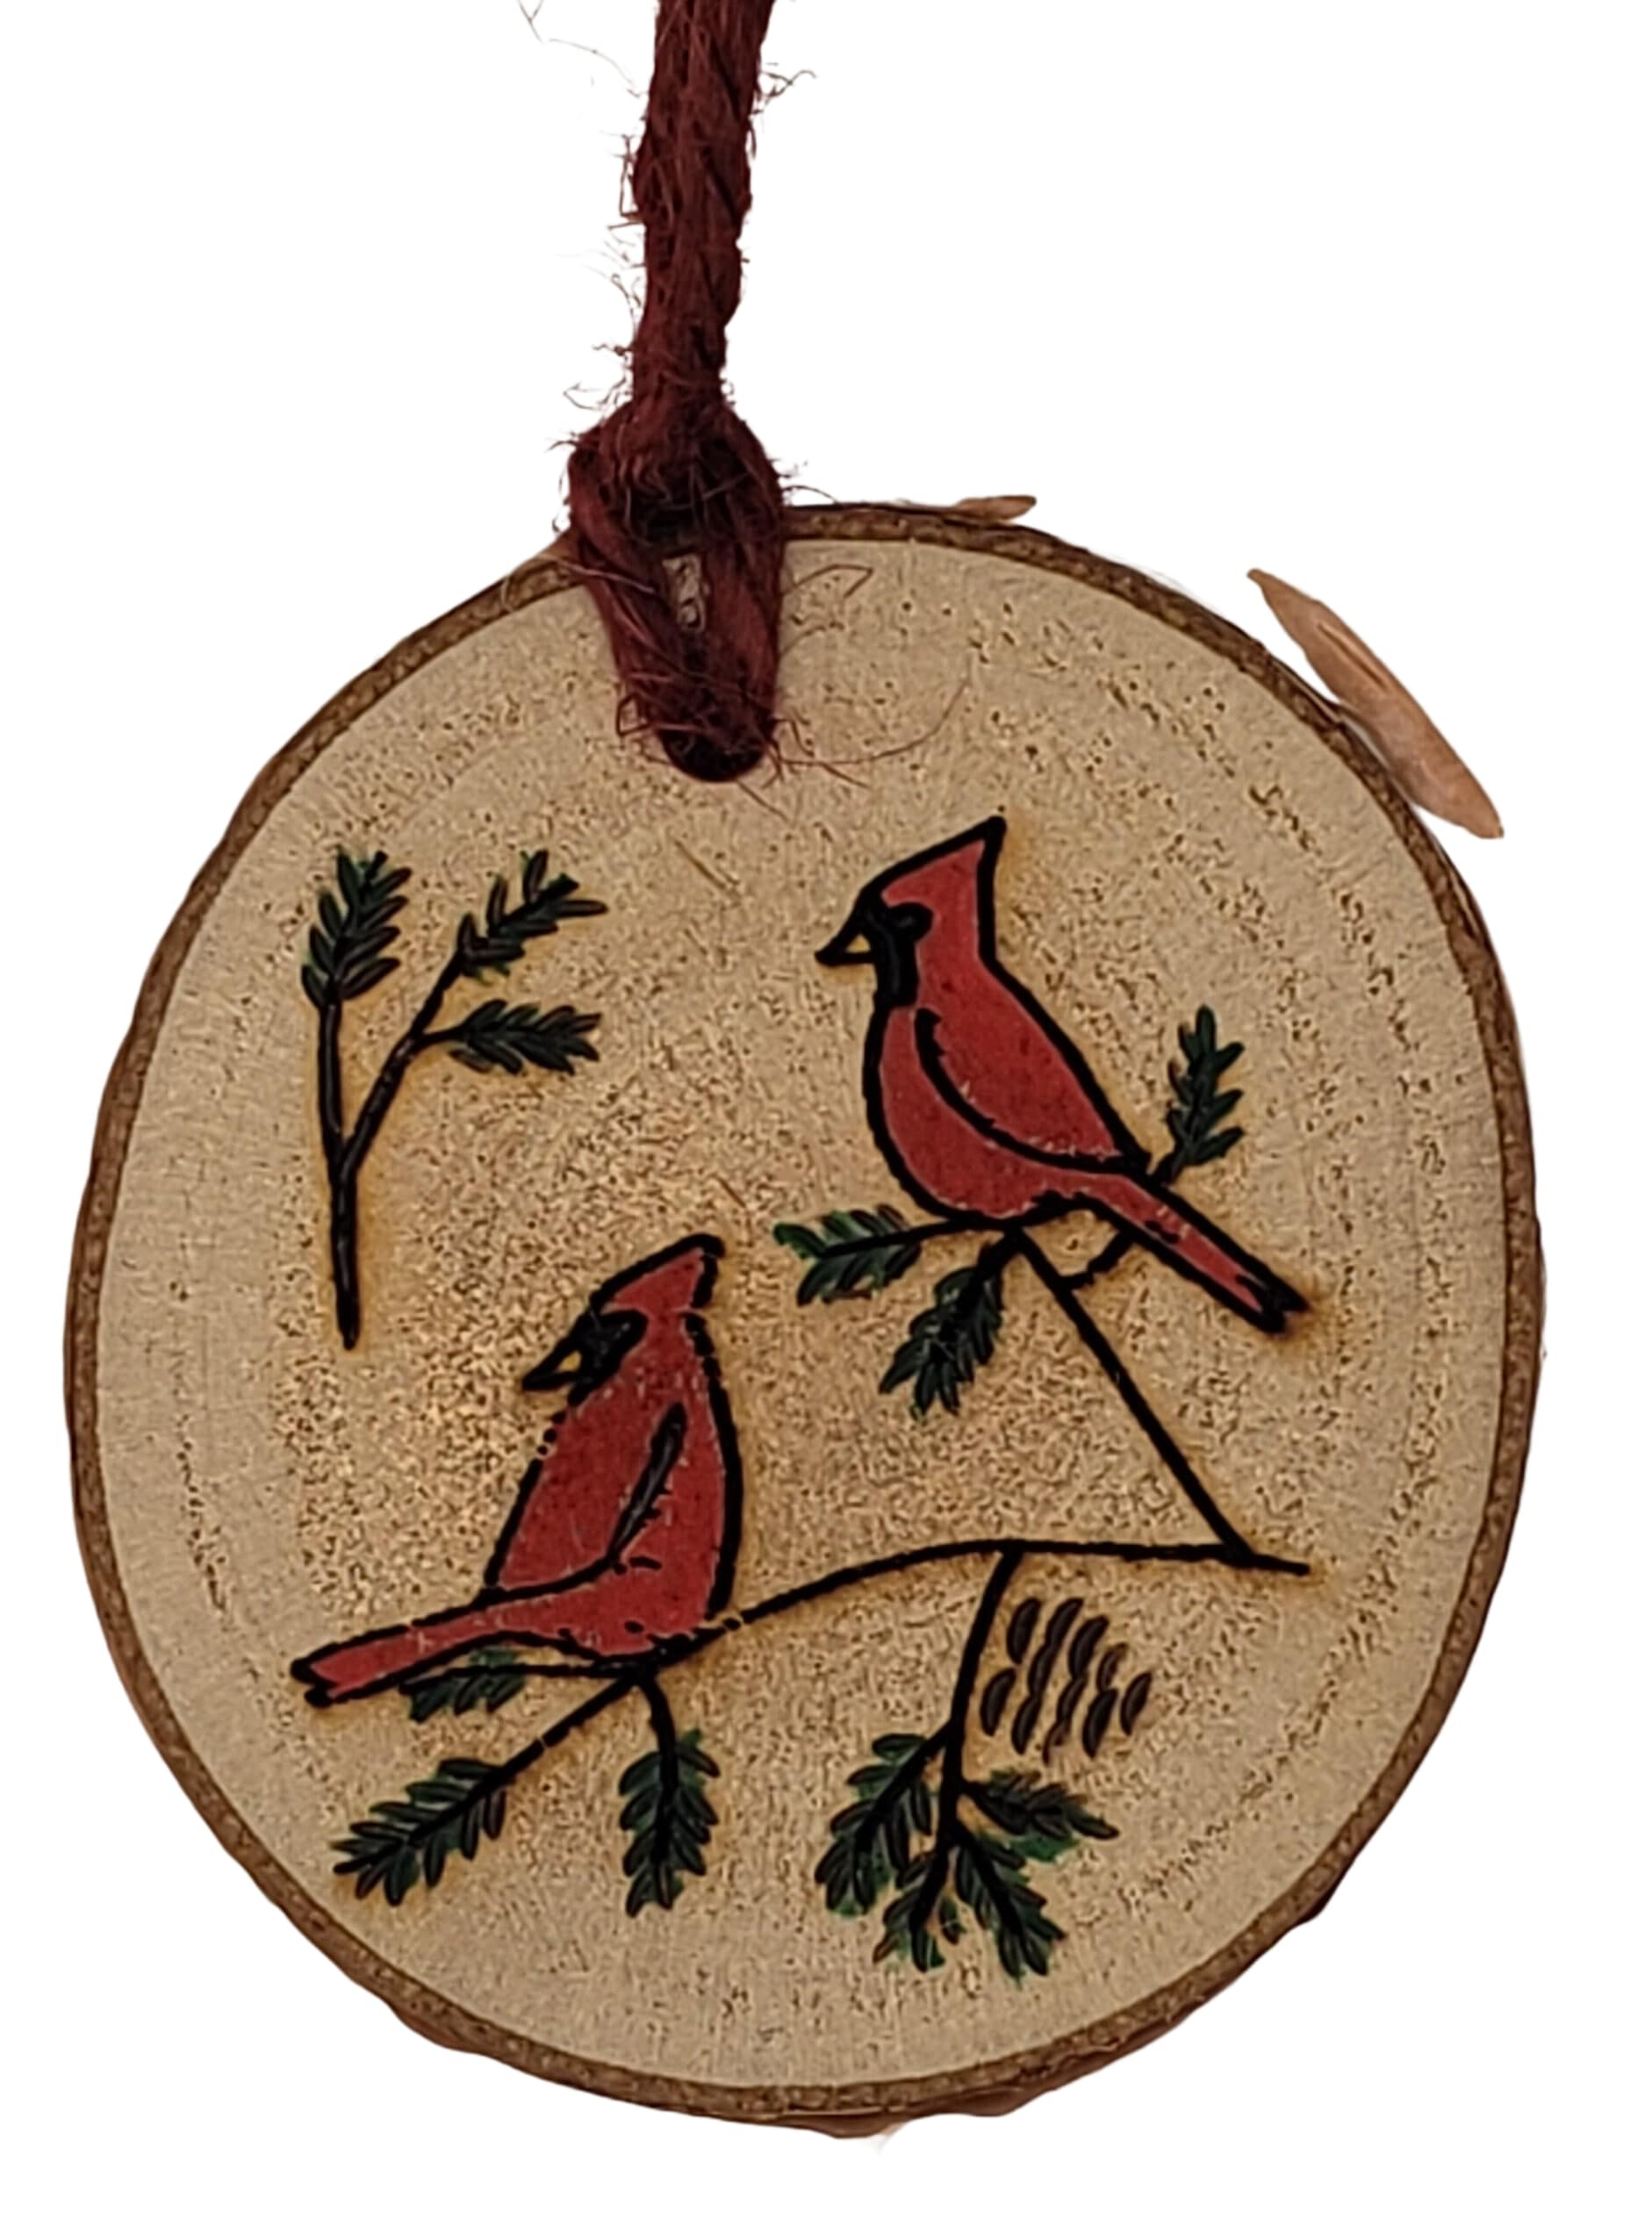 Natures Christmas- wood burned and hand painted cardinals Christmas tree ornament on birch wood